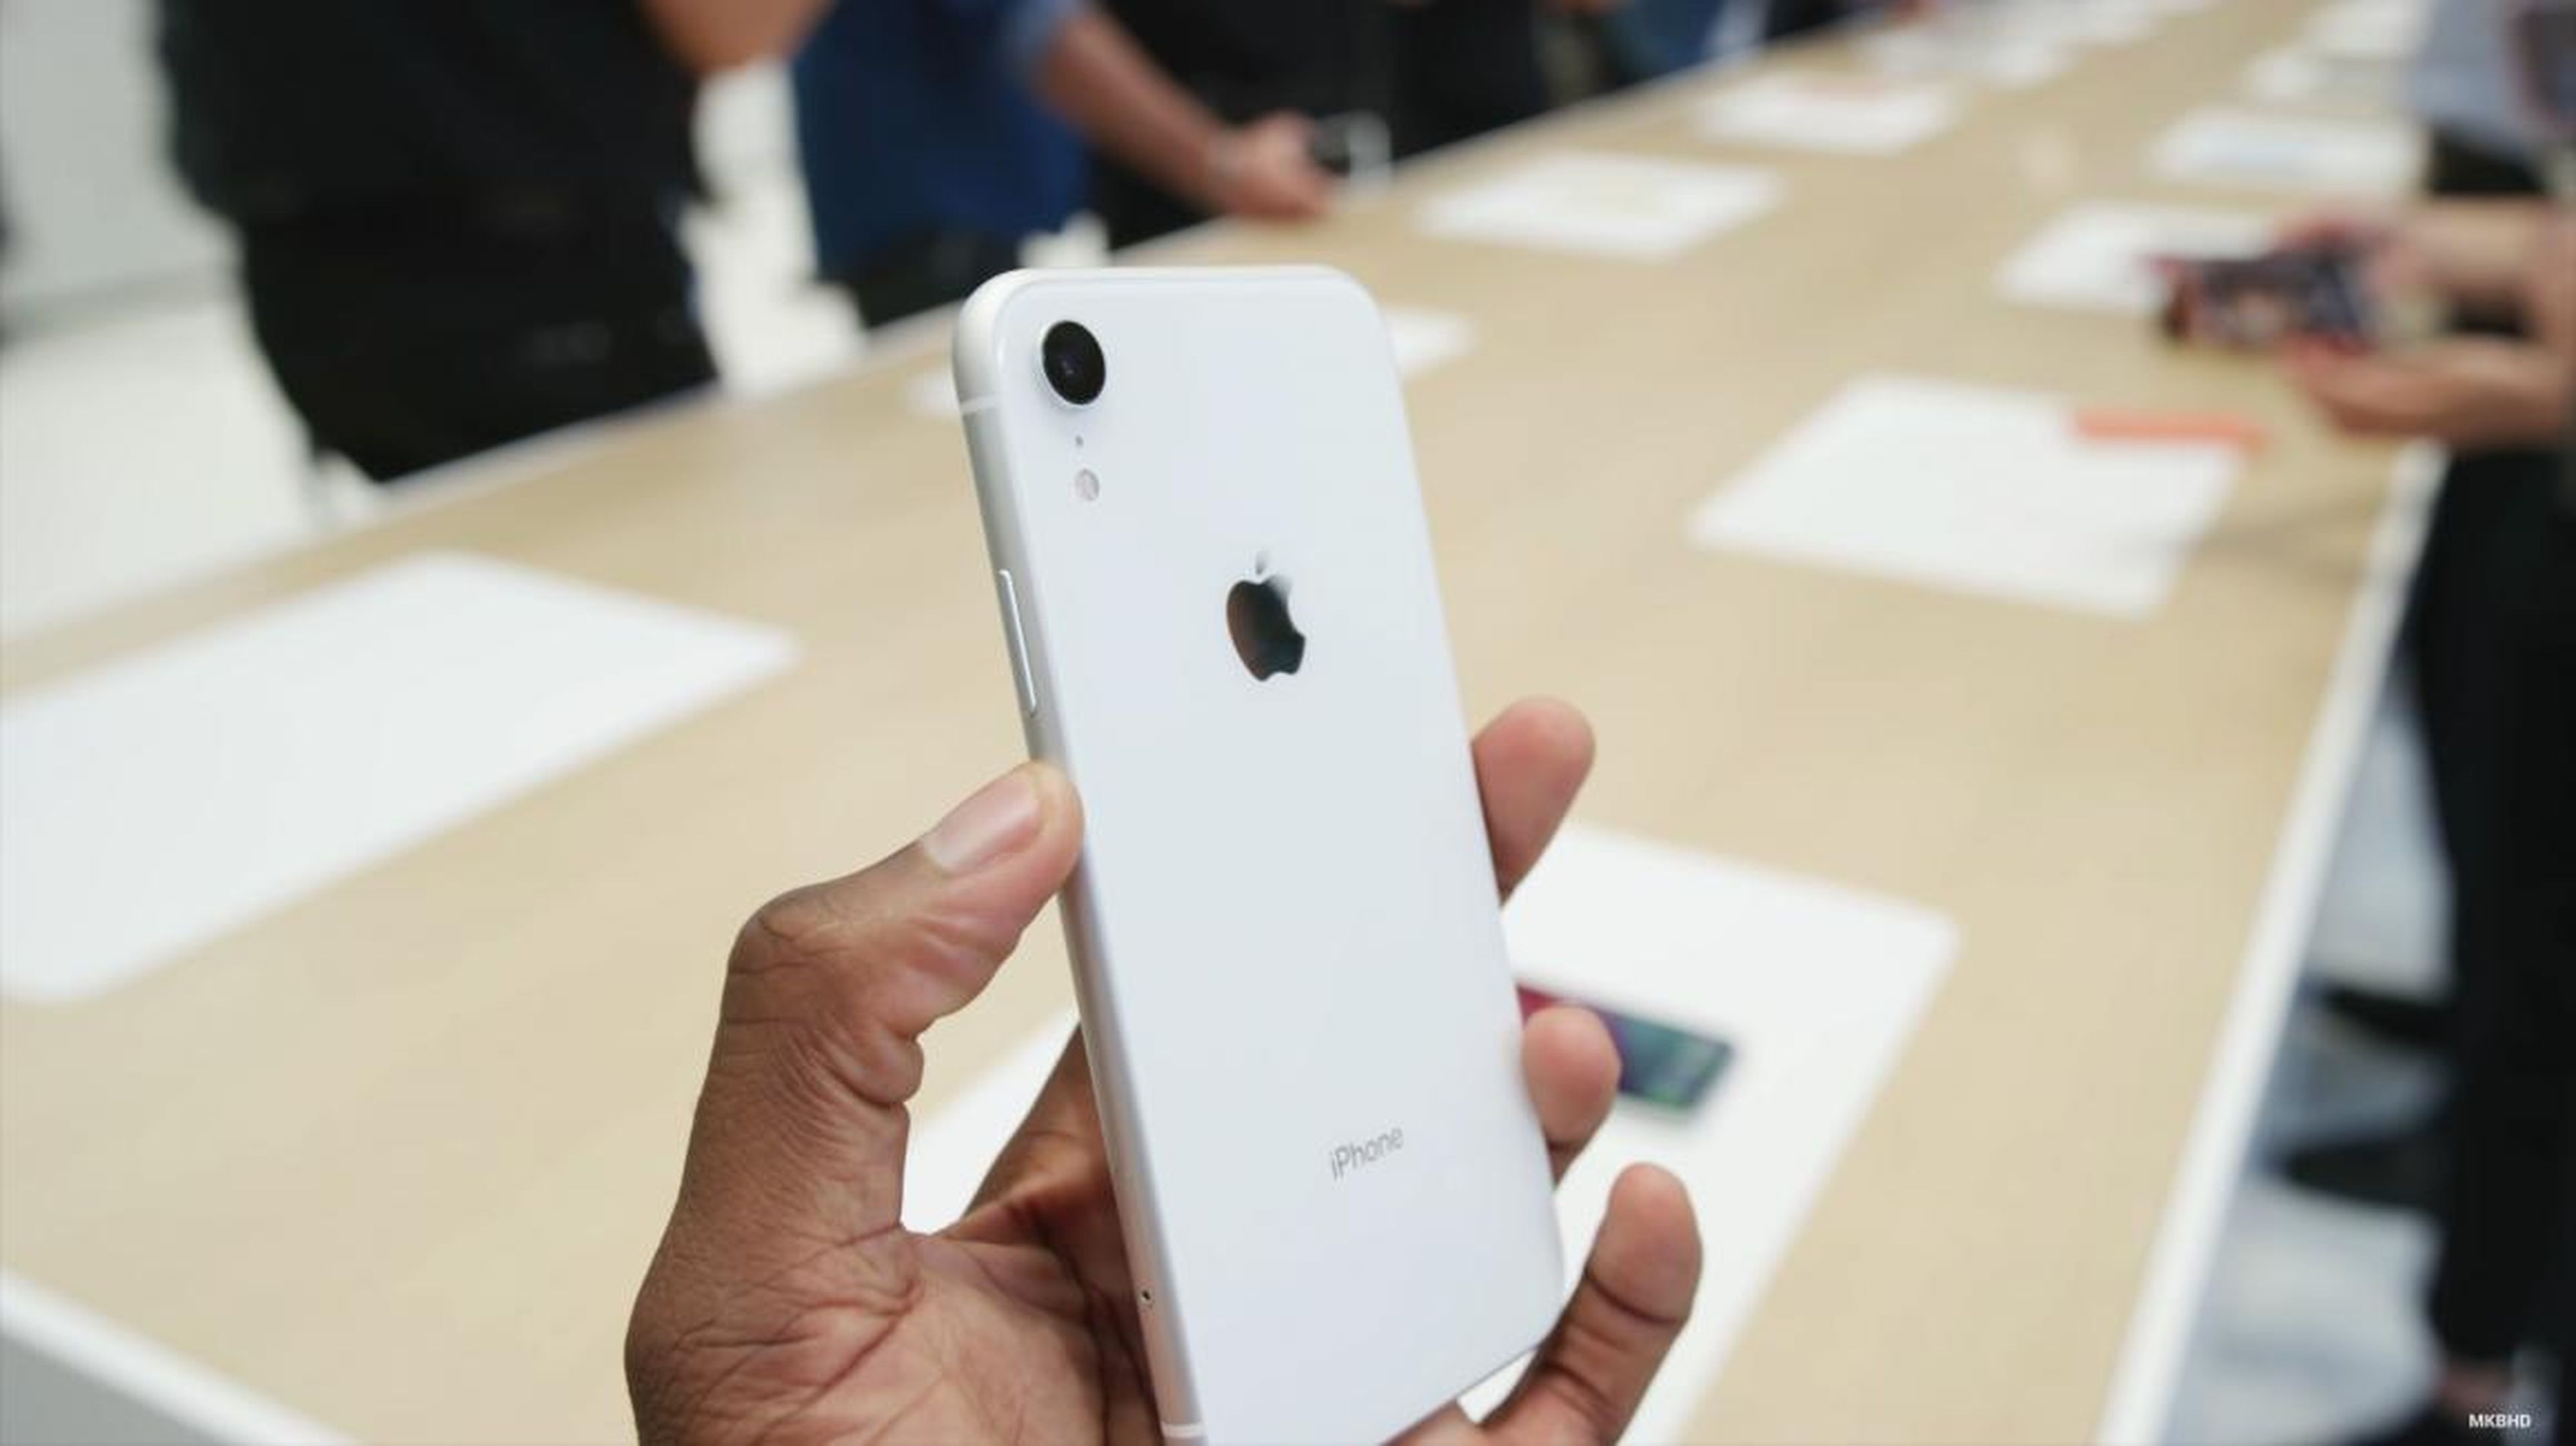 And here's that white iPhone XR from the side. The slightly darker chassis around the sides of the phone provides a nice contrast.